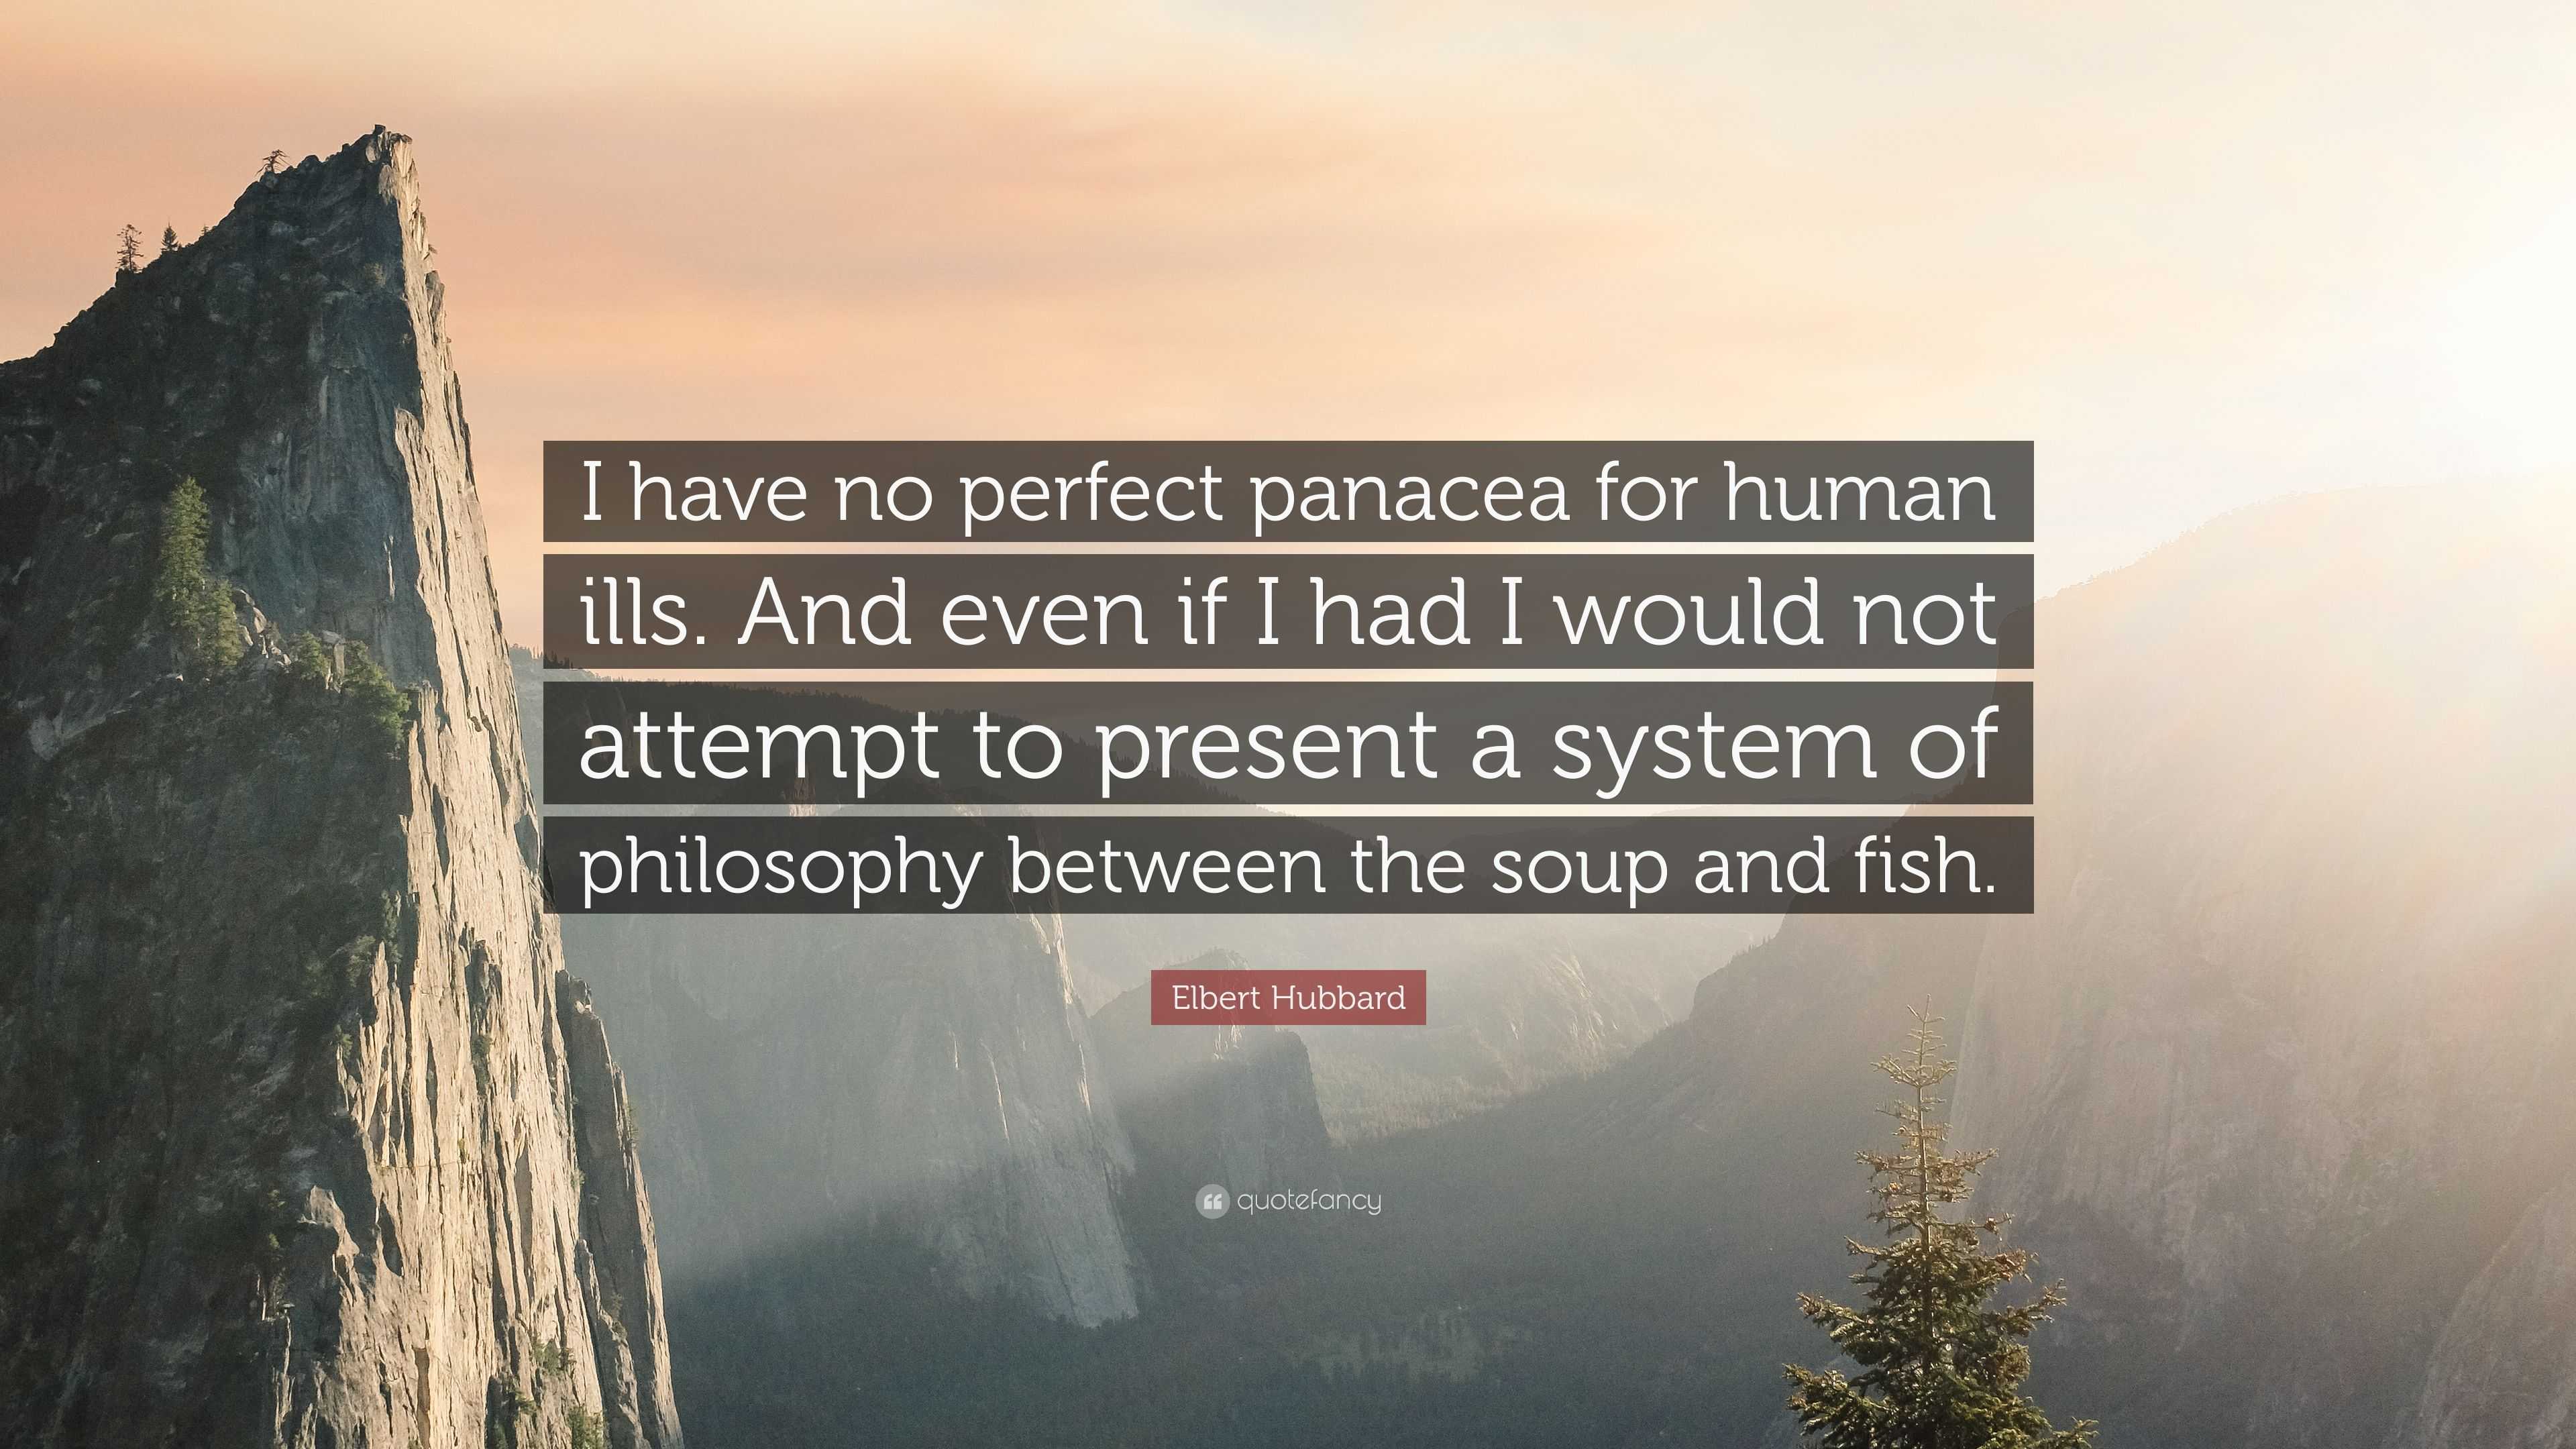 Elbert Hubbard Quote I Have No Perfect Panacea For Human Ills And Even If I Had I Would Not Attempt To Present A System Of Philosophy Betwee